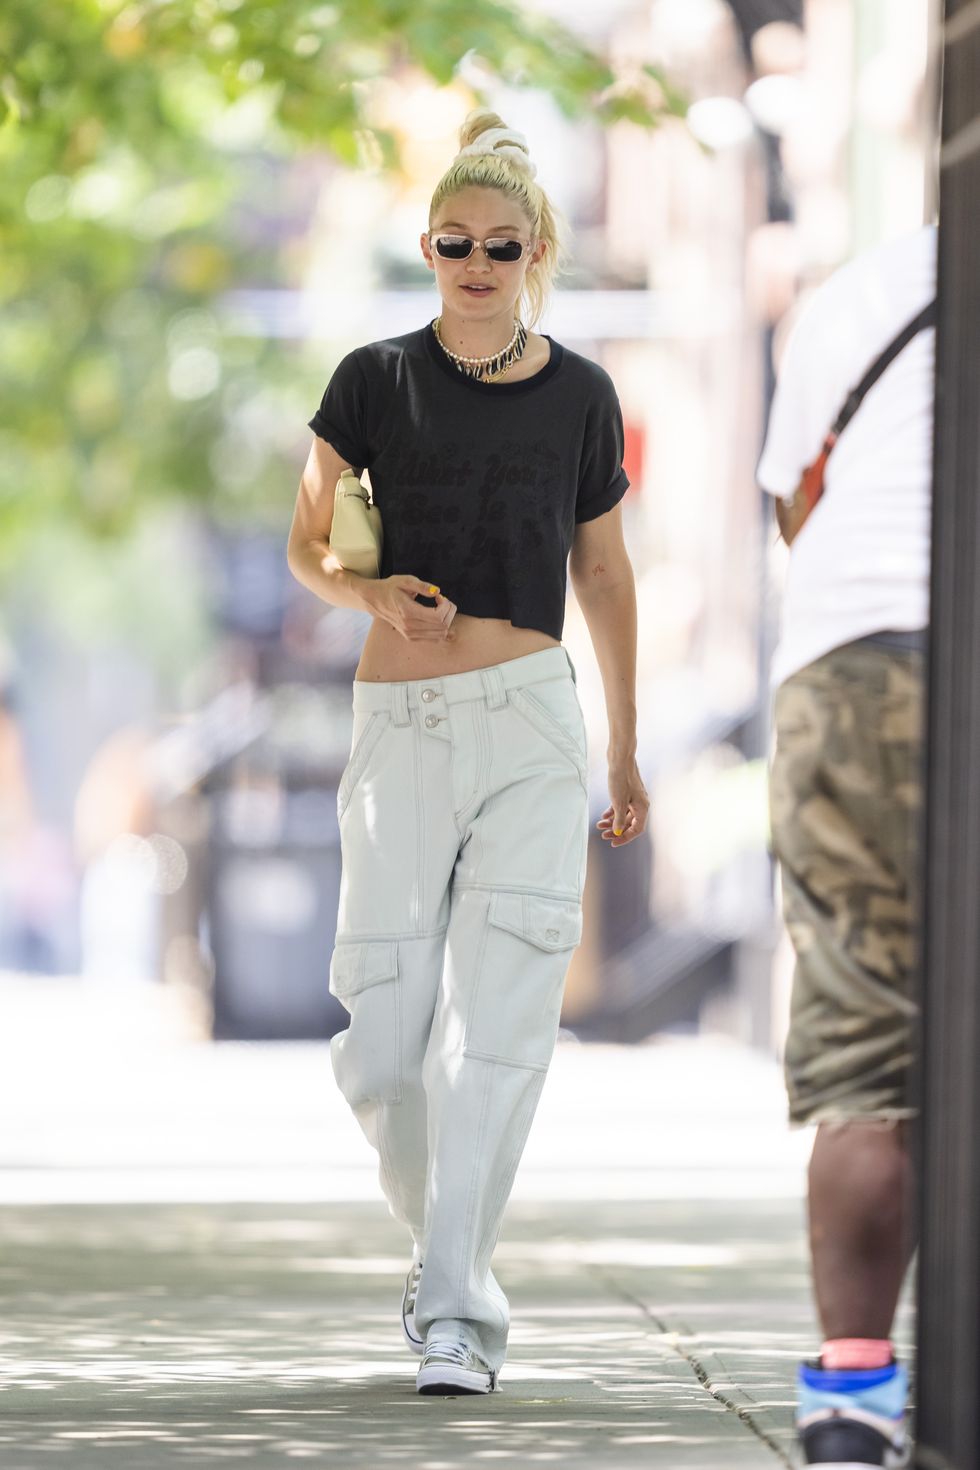 80+ Best Women Cargo Pants Outfit Ideas 2022: How To Wear This